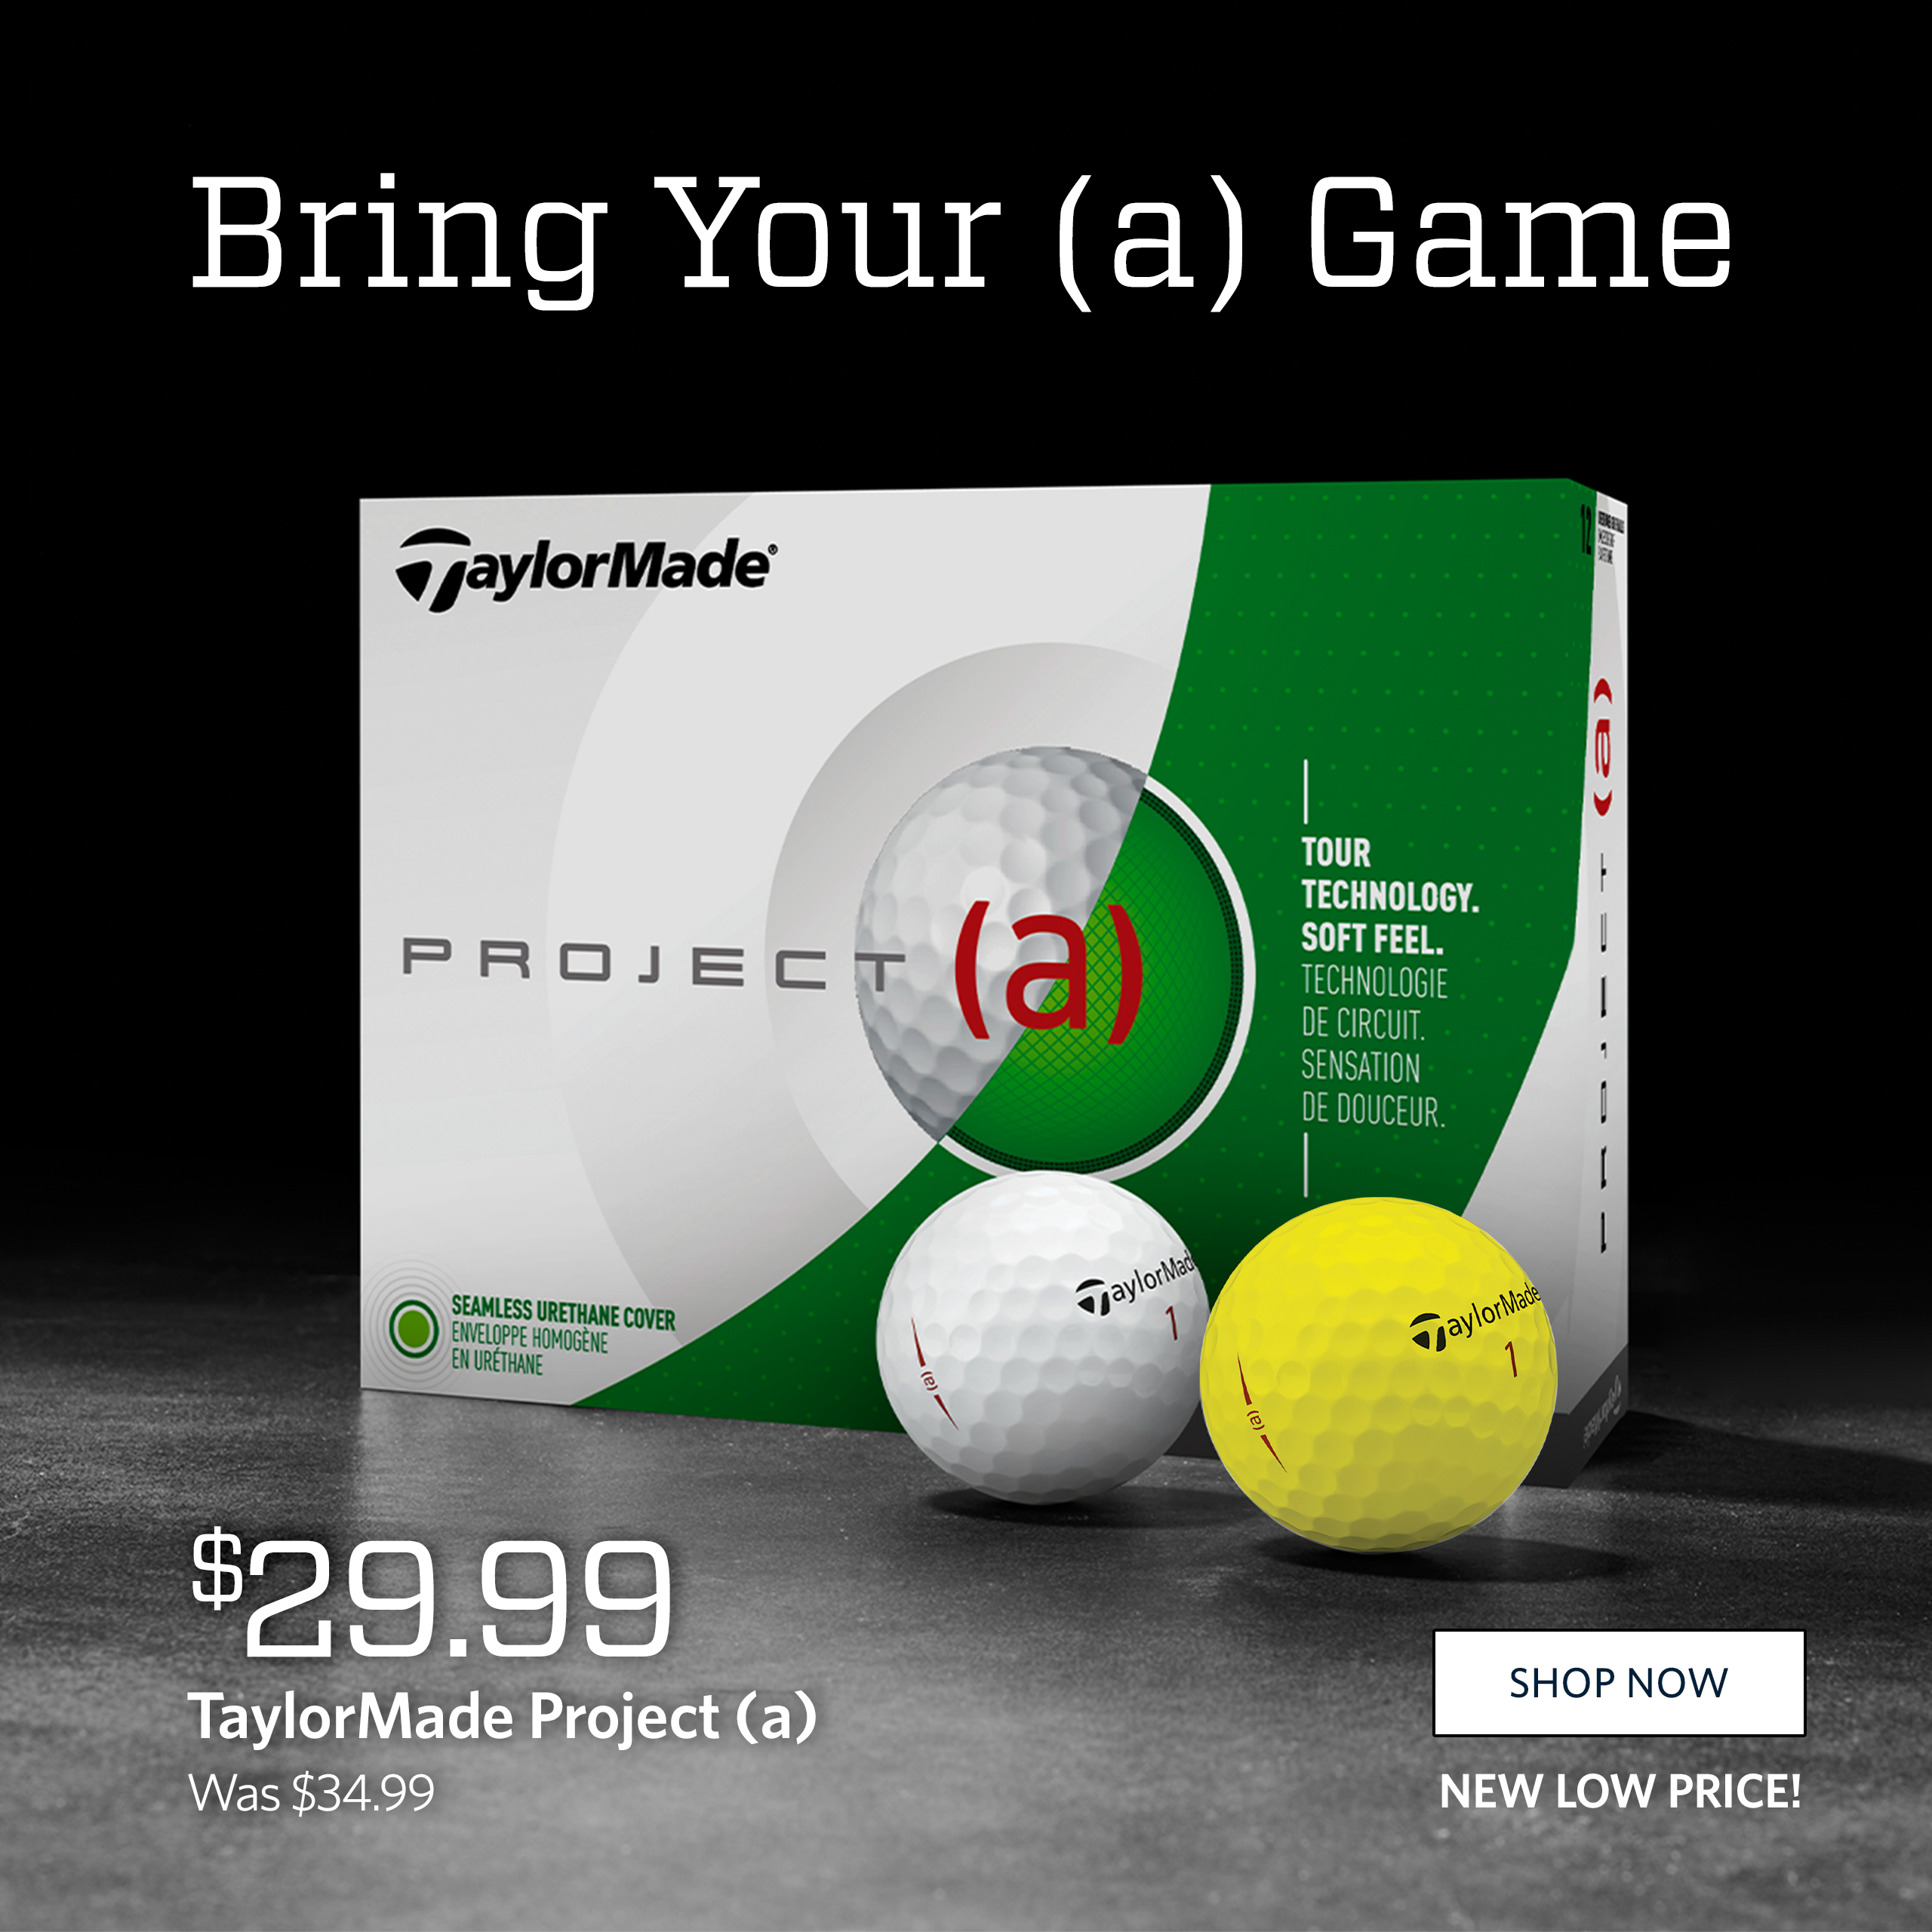 Bring Your (a) Game. Sale $29.99. TaylorMade Project (a). Was $34.99. Shop Now. New Low Price!